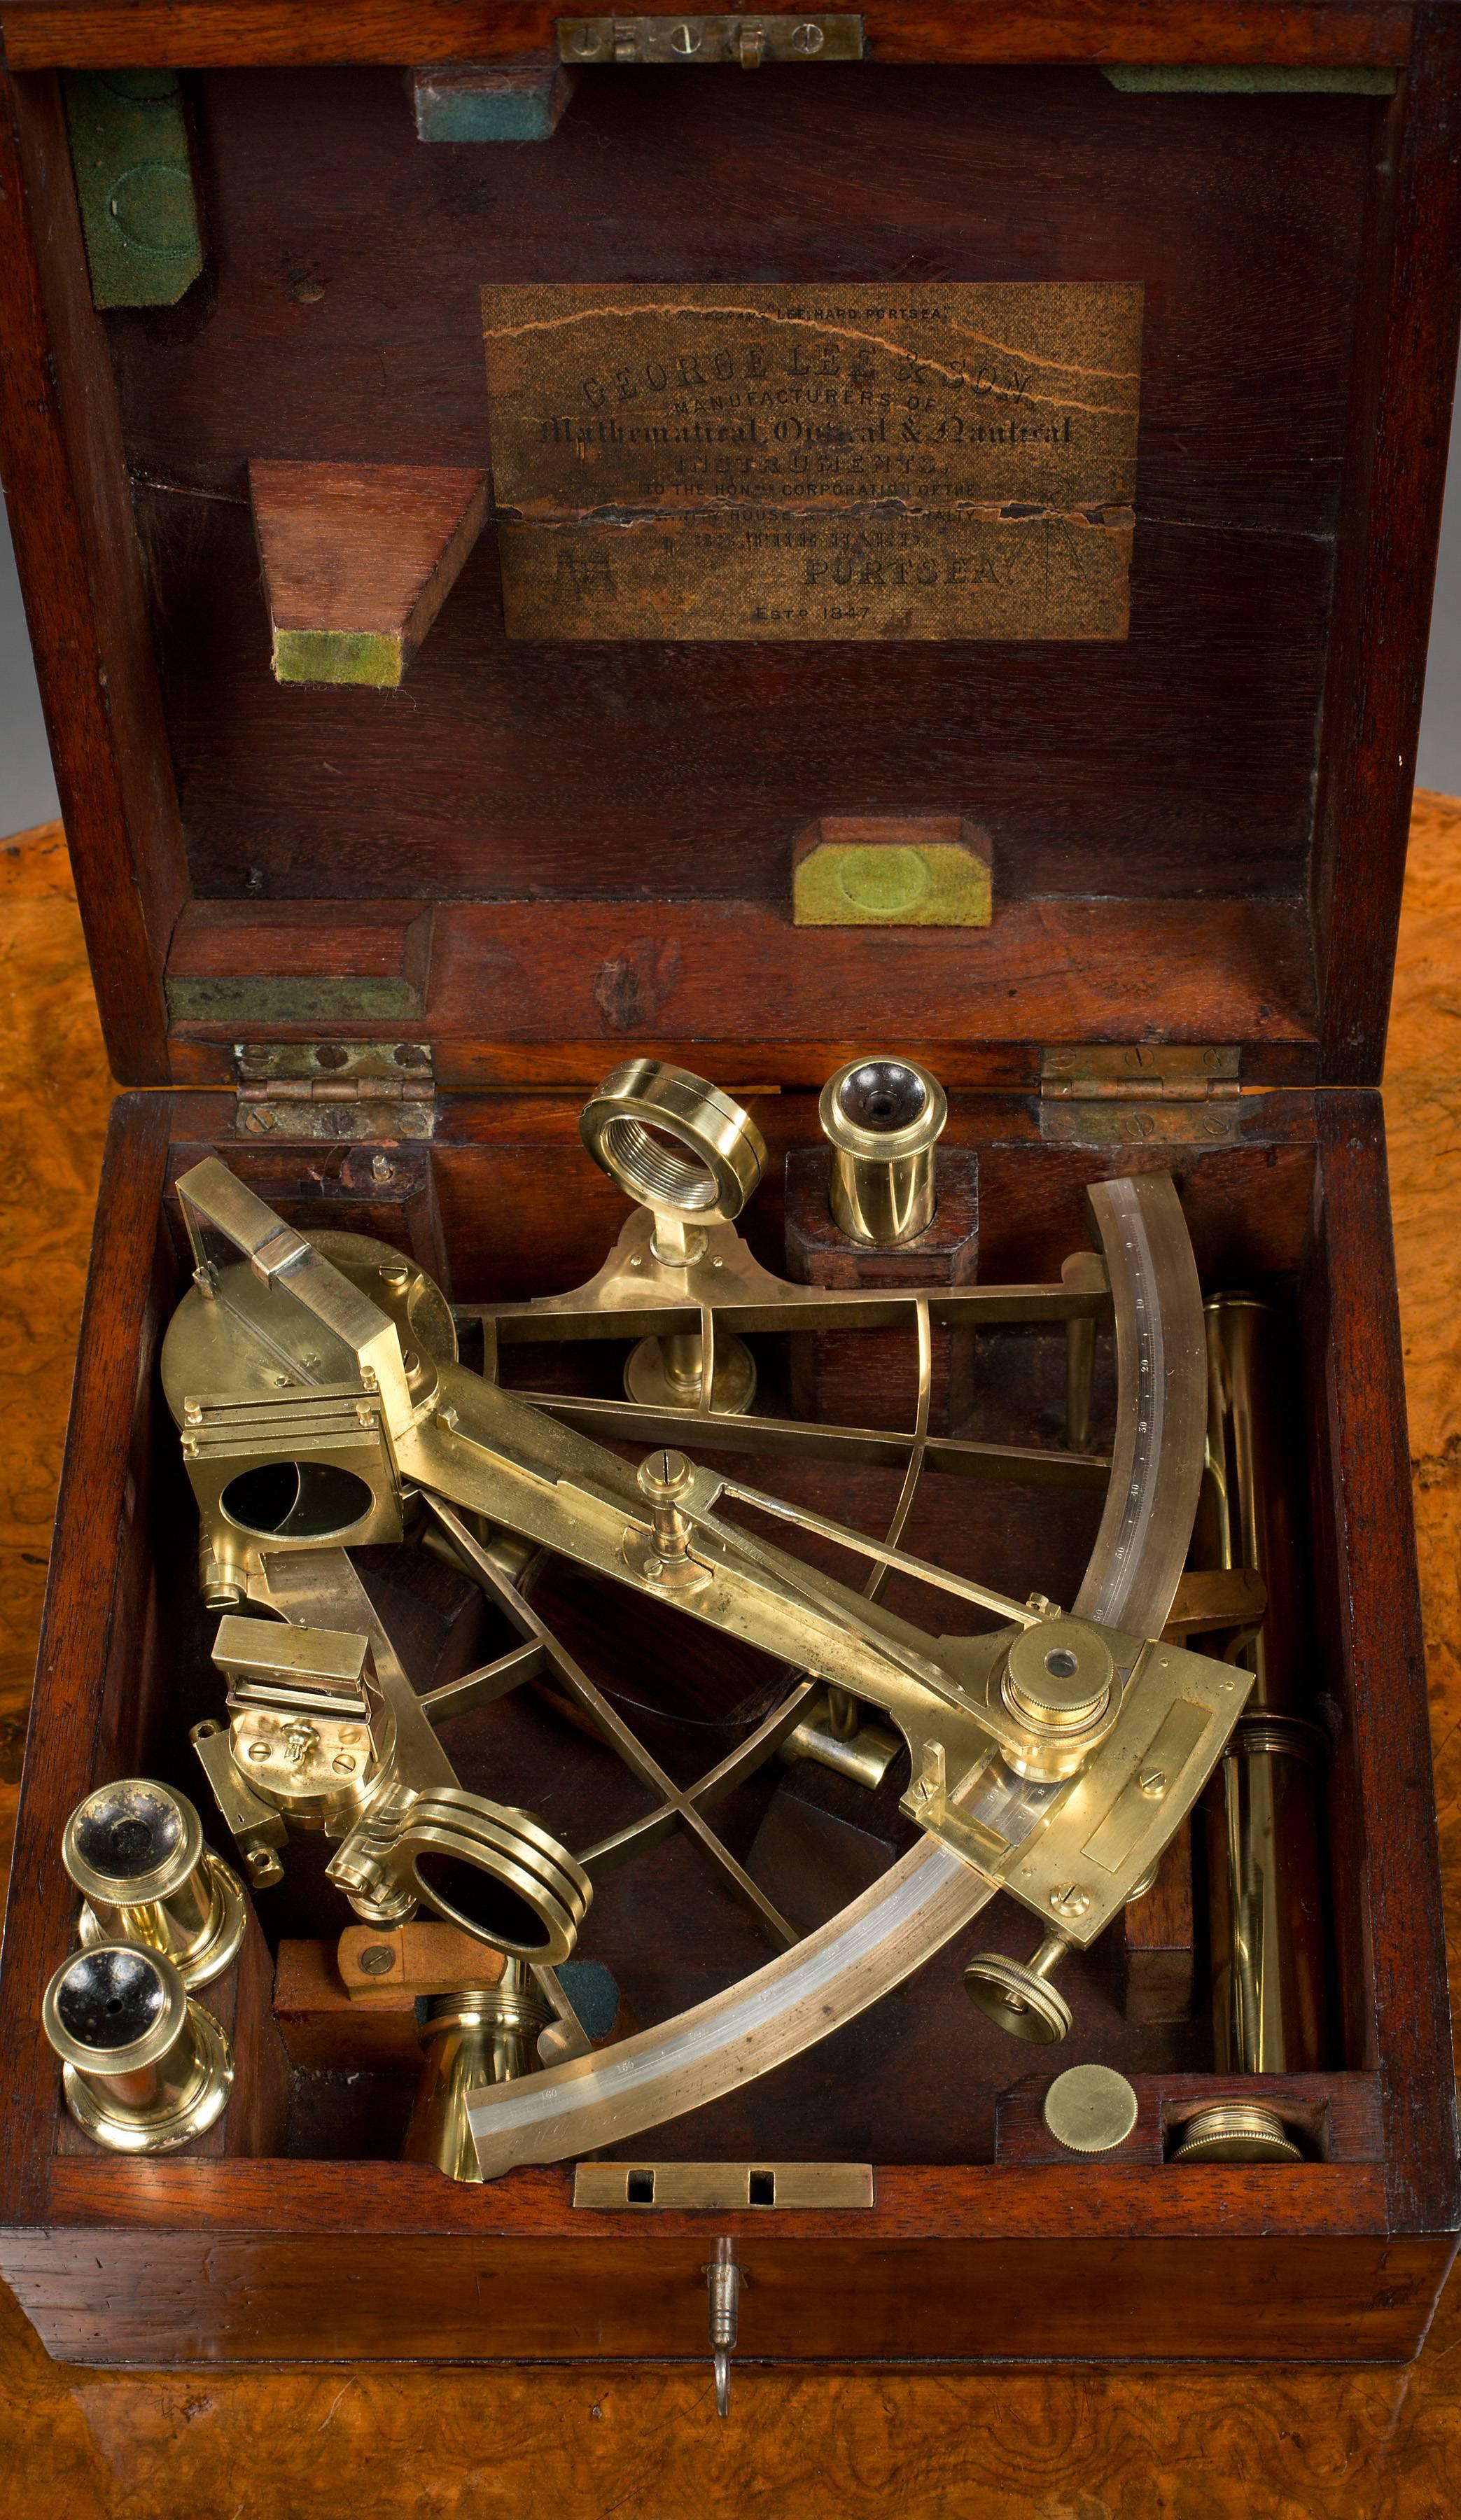 A fine 8 inch lacquered brass frame radius Vernier sextant by Crichton Brothers of London. Polished arc signed ‘Crichton Bros, London’ and R.H.Henderson, Esq R.N. 

Silvered scale marked from 0 degrees to 160 degrees with swivel magnifier,